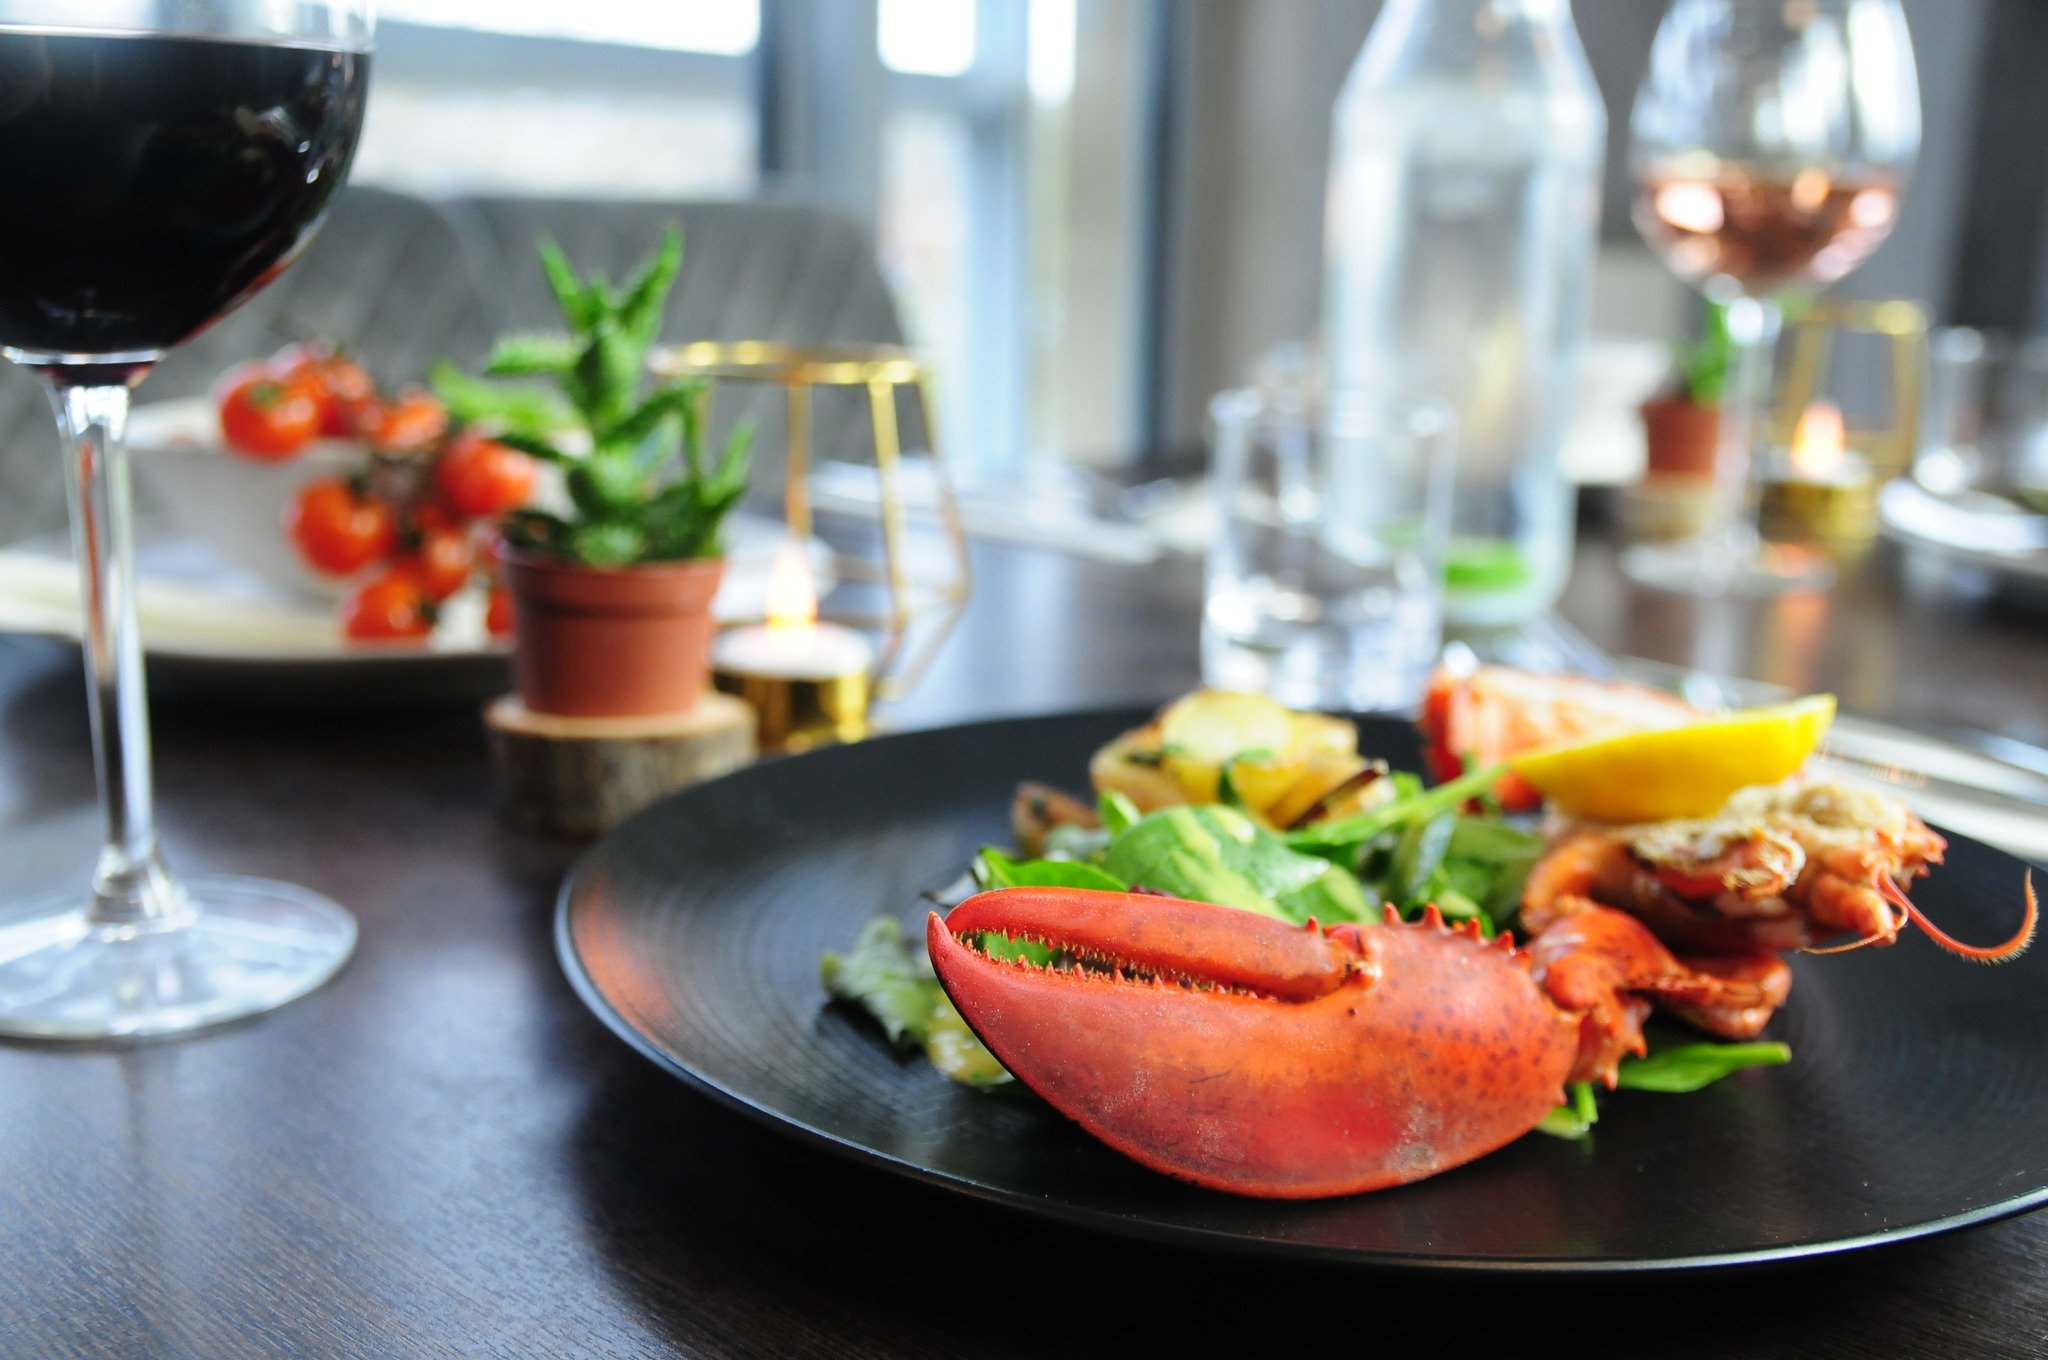 🦞✨ Indulge in today's delicacy at The Restaurant - half a lobster awaits! Treat yourself this weekend and join us for a luxurious dining experience. And to top it off, there's a cheeky glass of Tanners' red waiting for you here 😉🌟🍷

#WeekendTreat